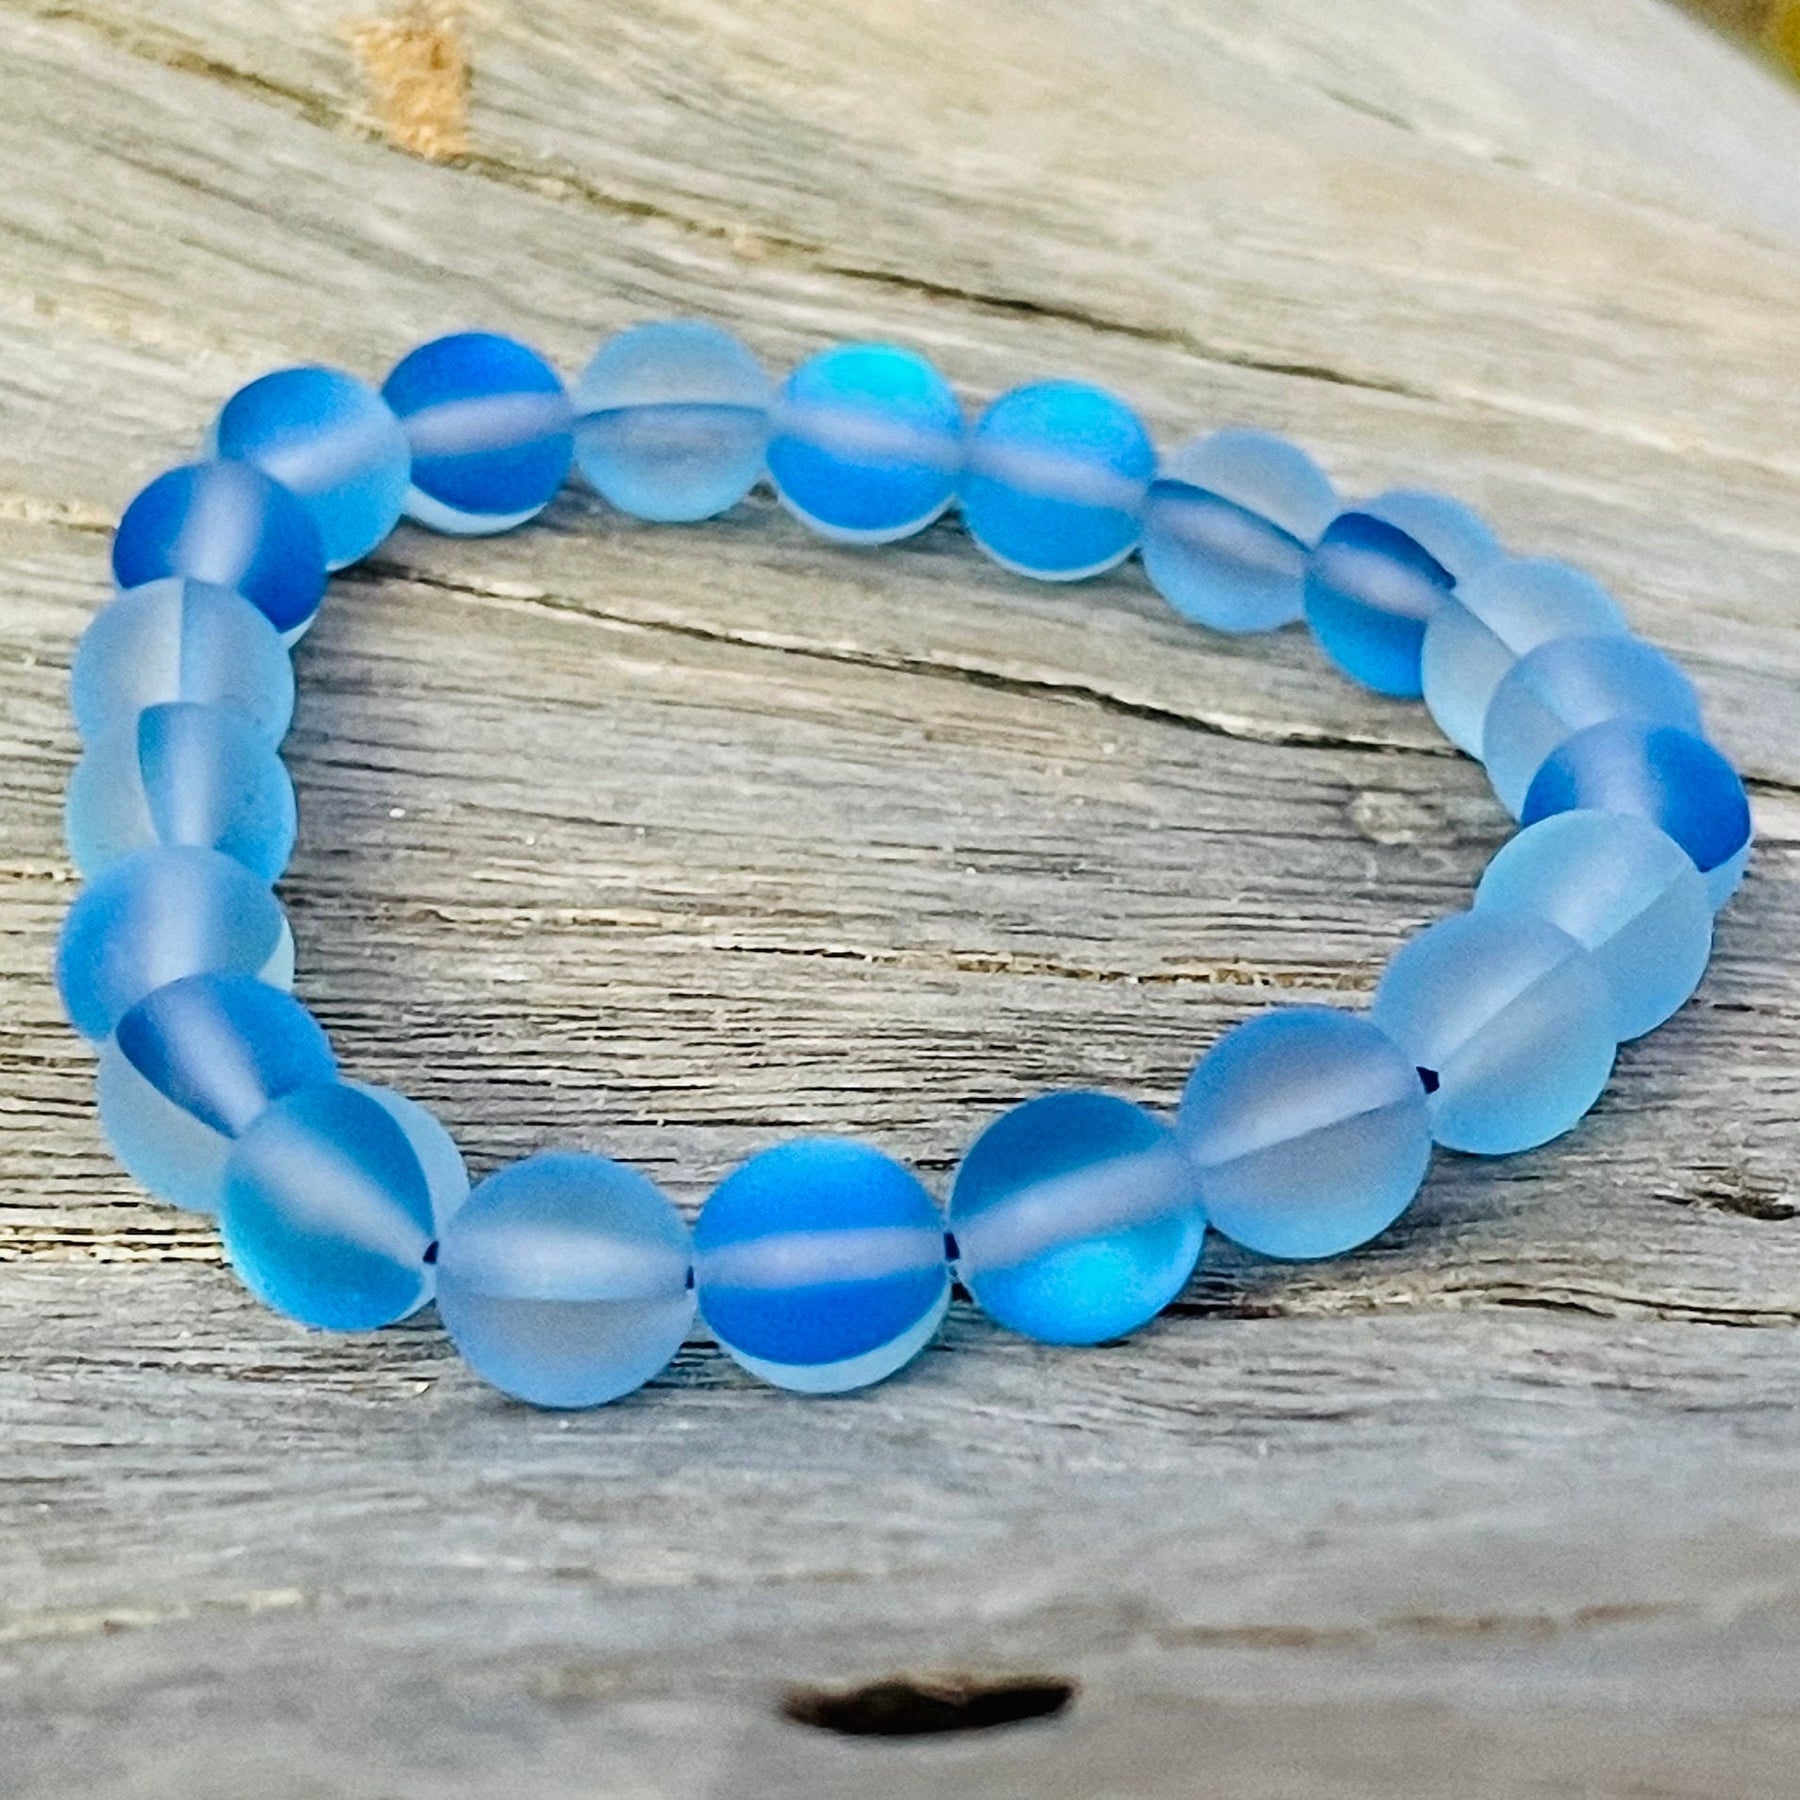 450pcs 8mm Blue Glass Beads 15 Styles Sea Blue Crackle Glass Bead Round  Loose Beads Spacers Craft Glass Beads for Summer Boho Hawaii Bracelets